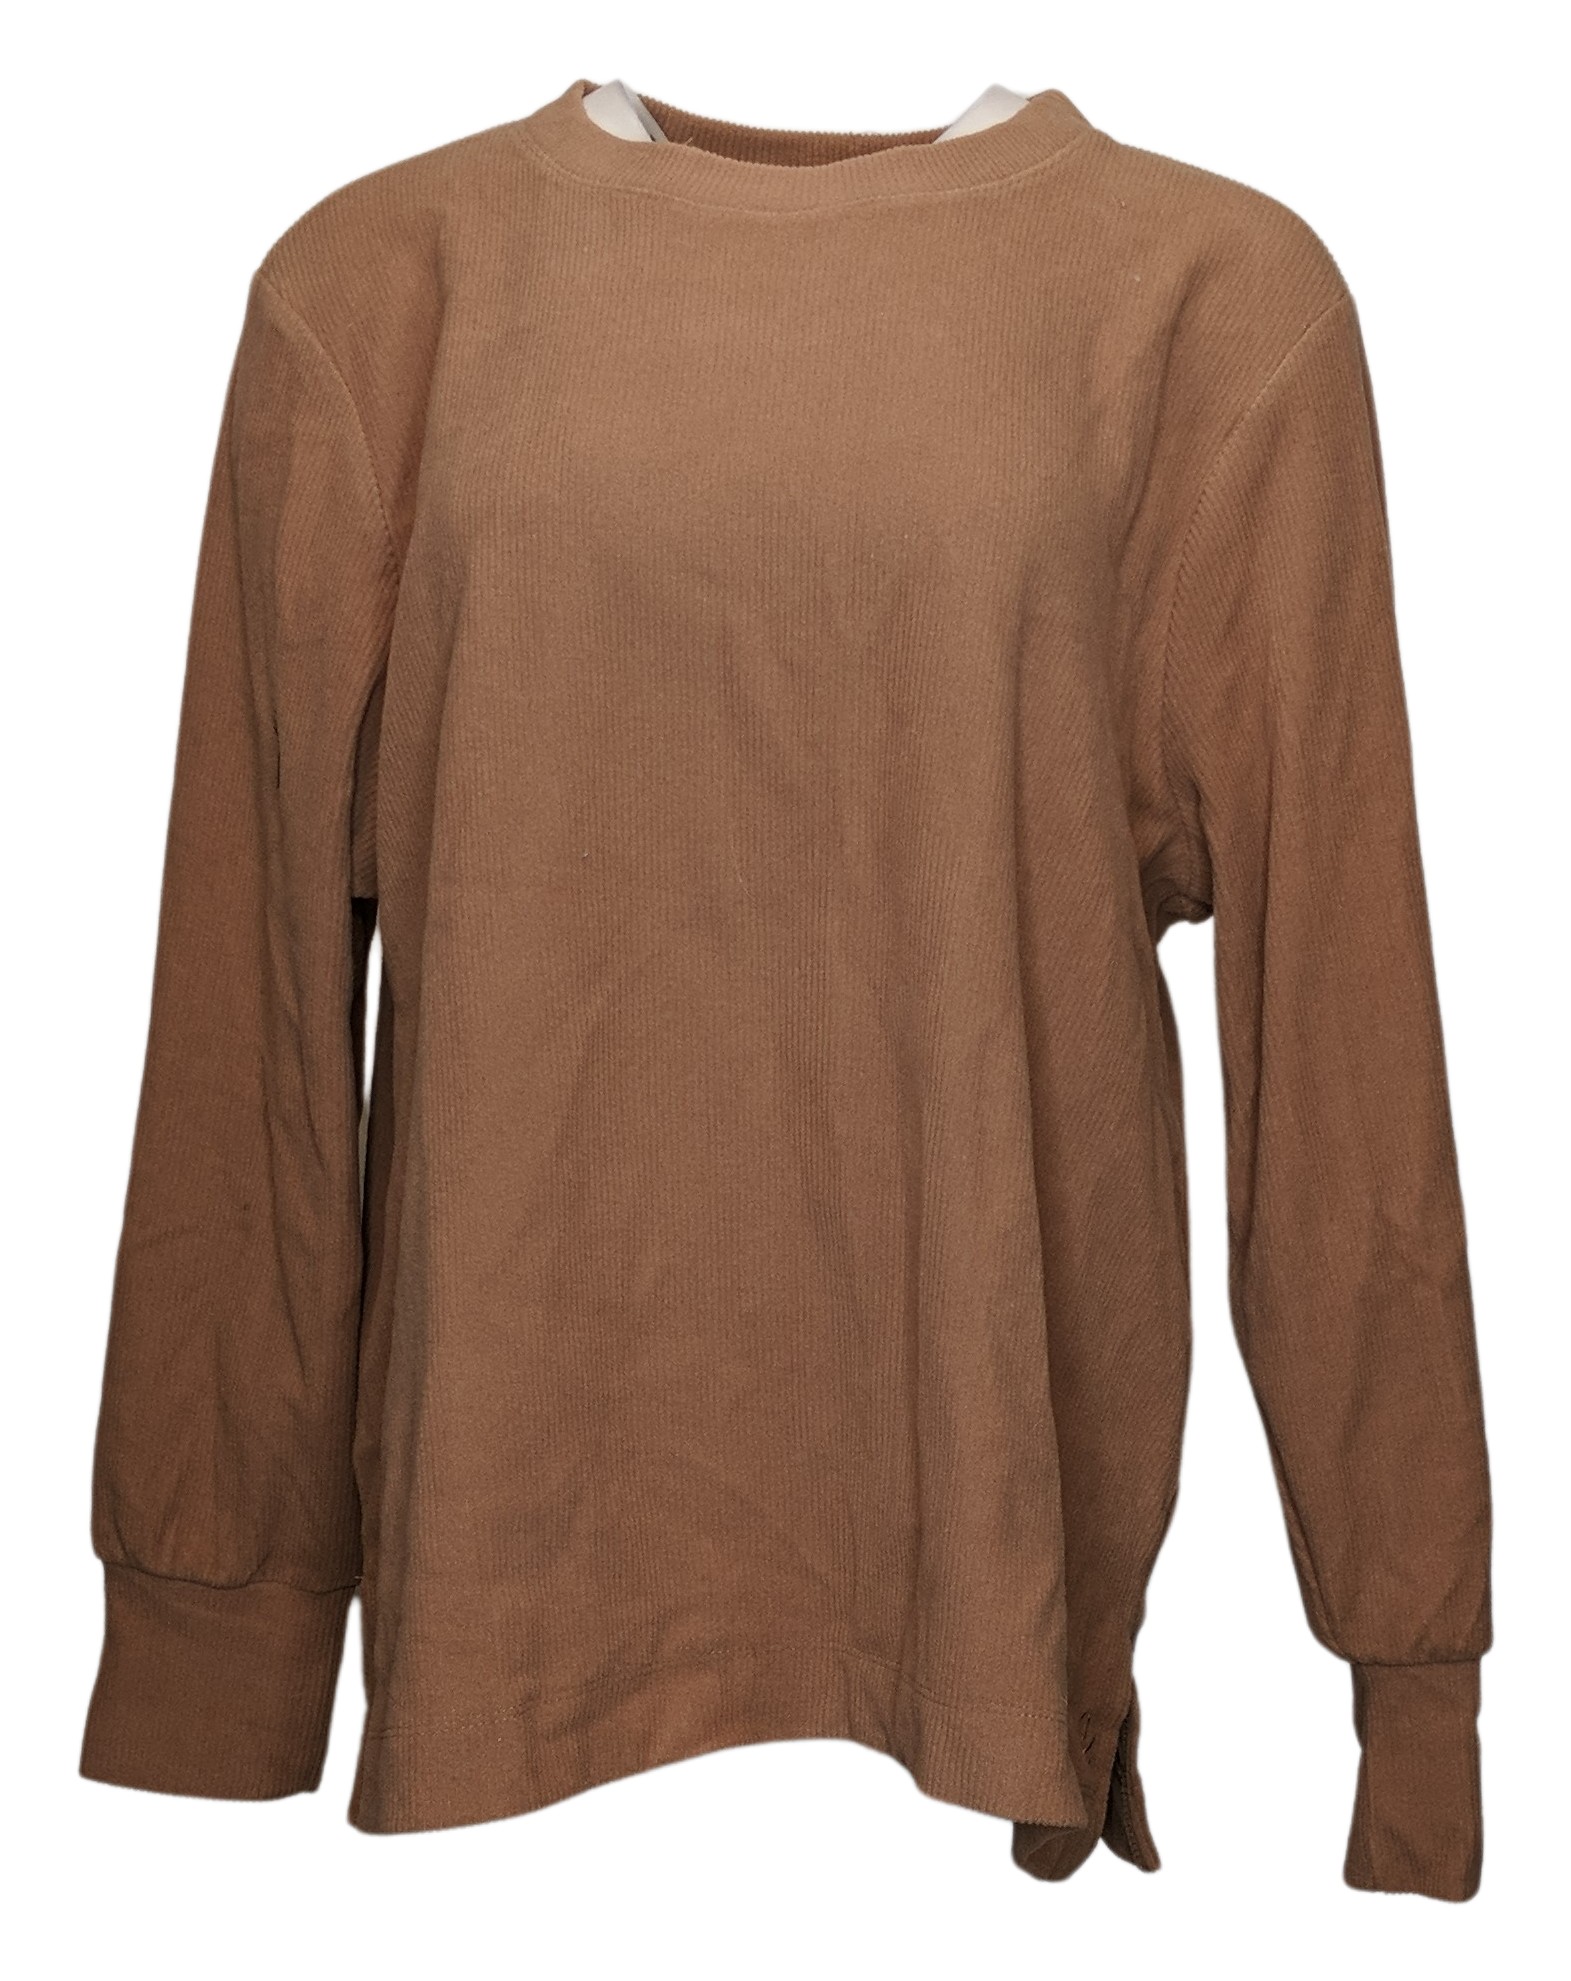 Cuddl Duds Women's Top Sz XL Ribbed Fleece Puff Sleeve Pullover Brown A544620